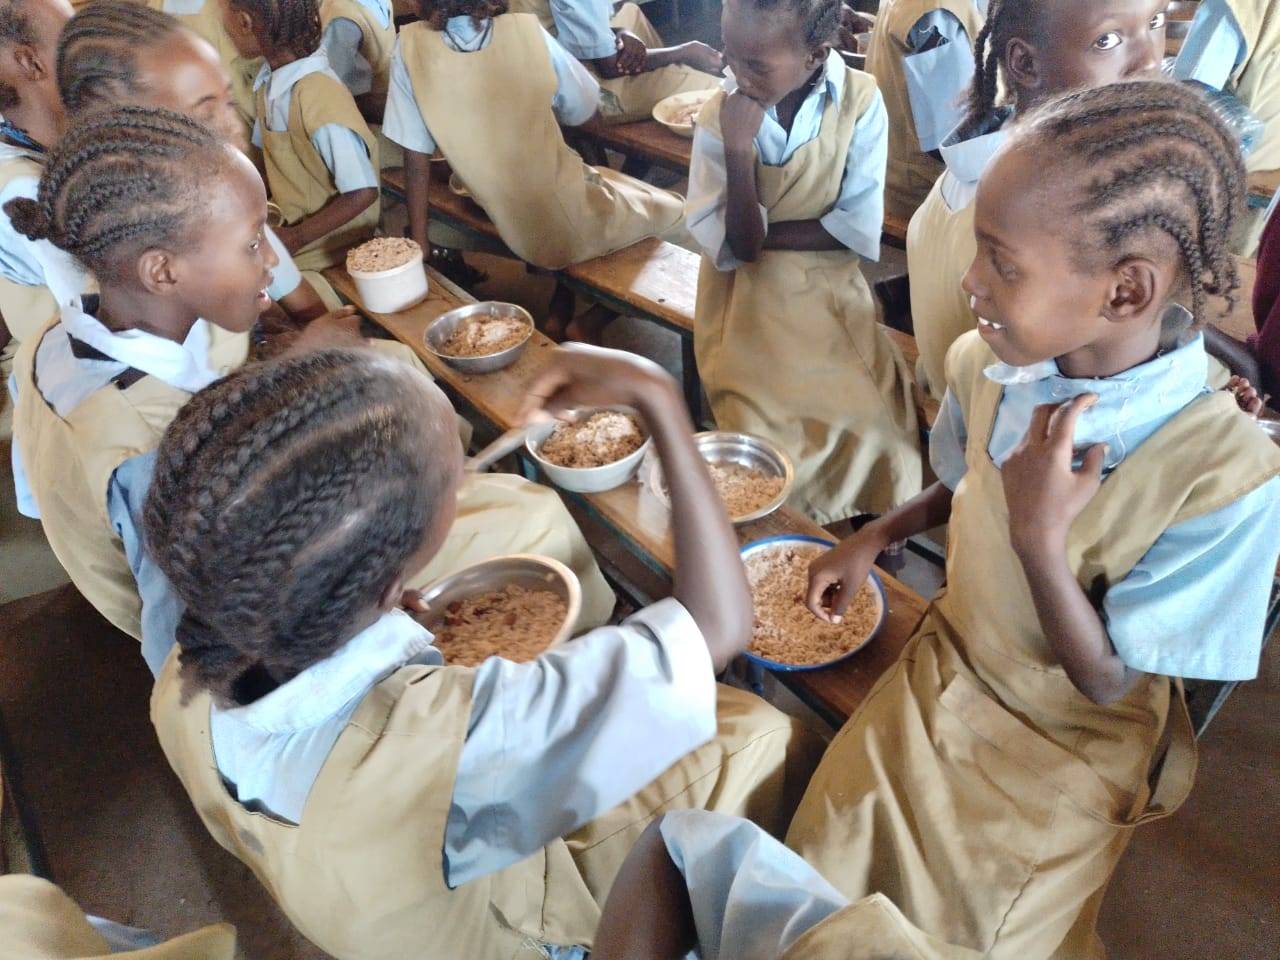 Uproar over plans to halt school feeding programme as activists plan protests